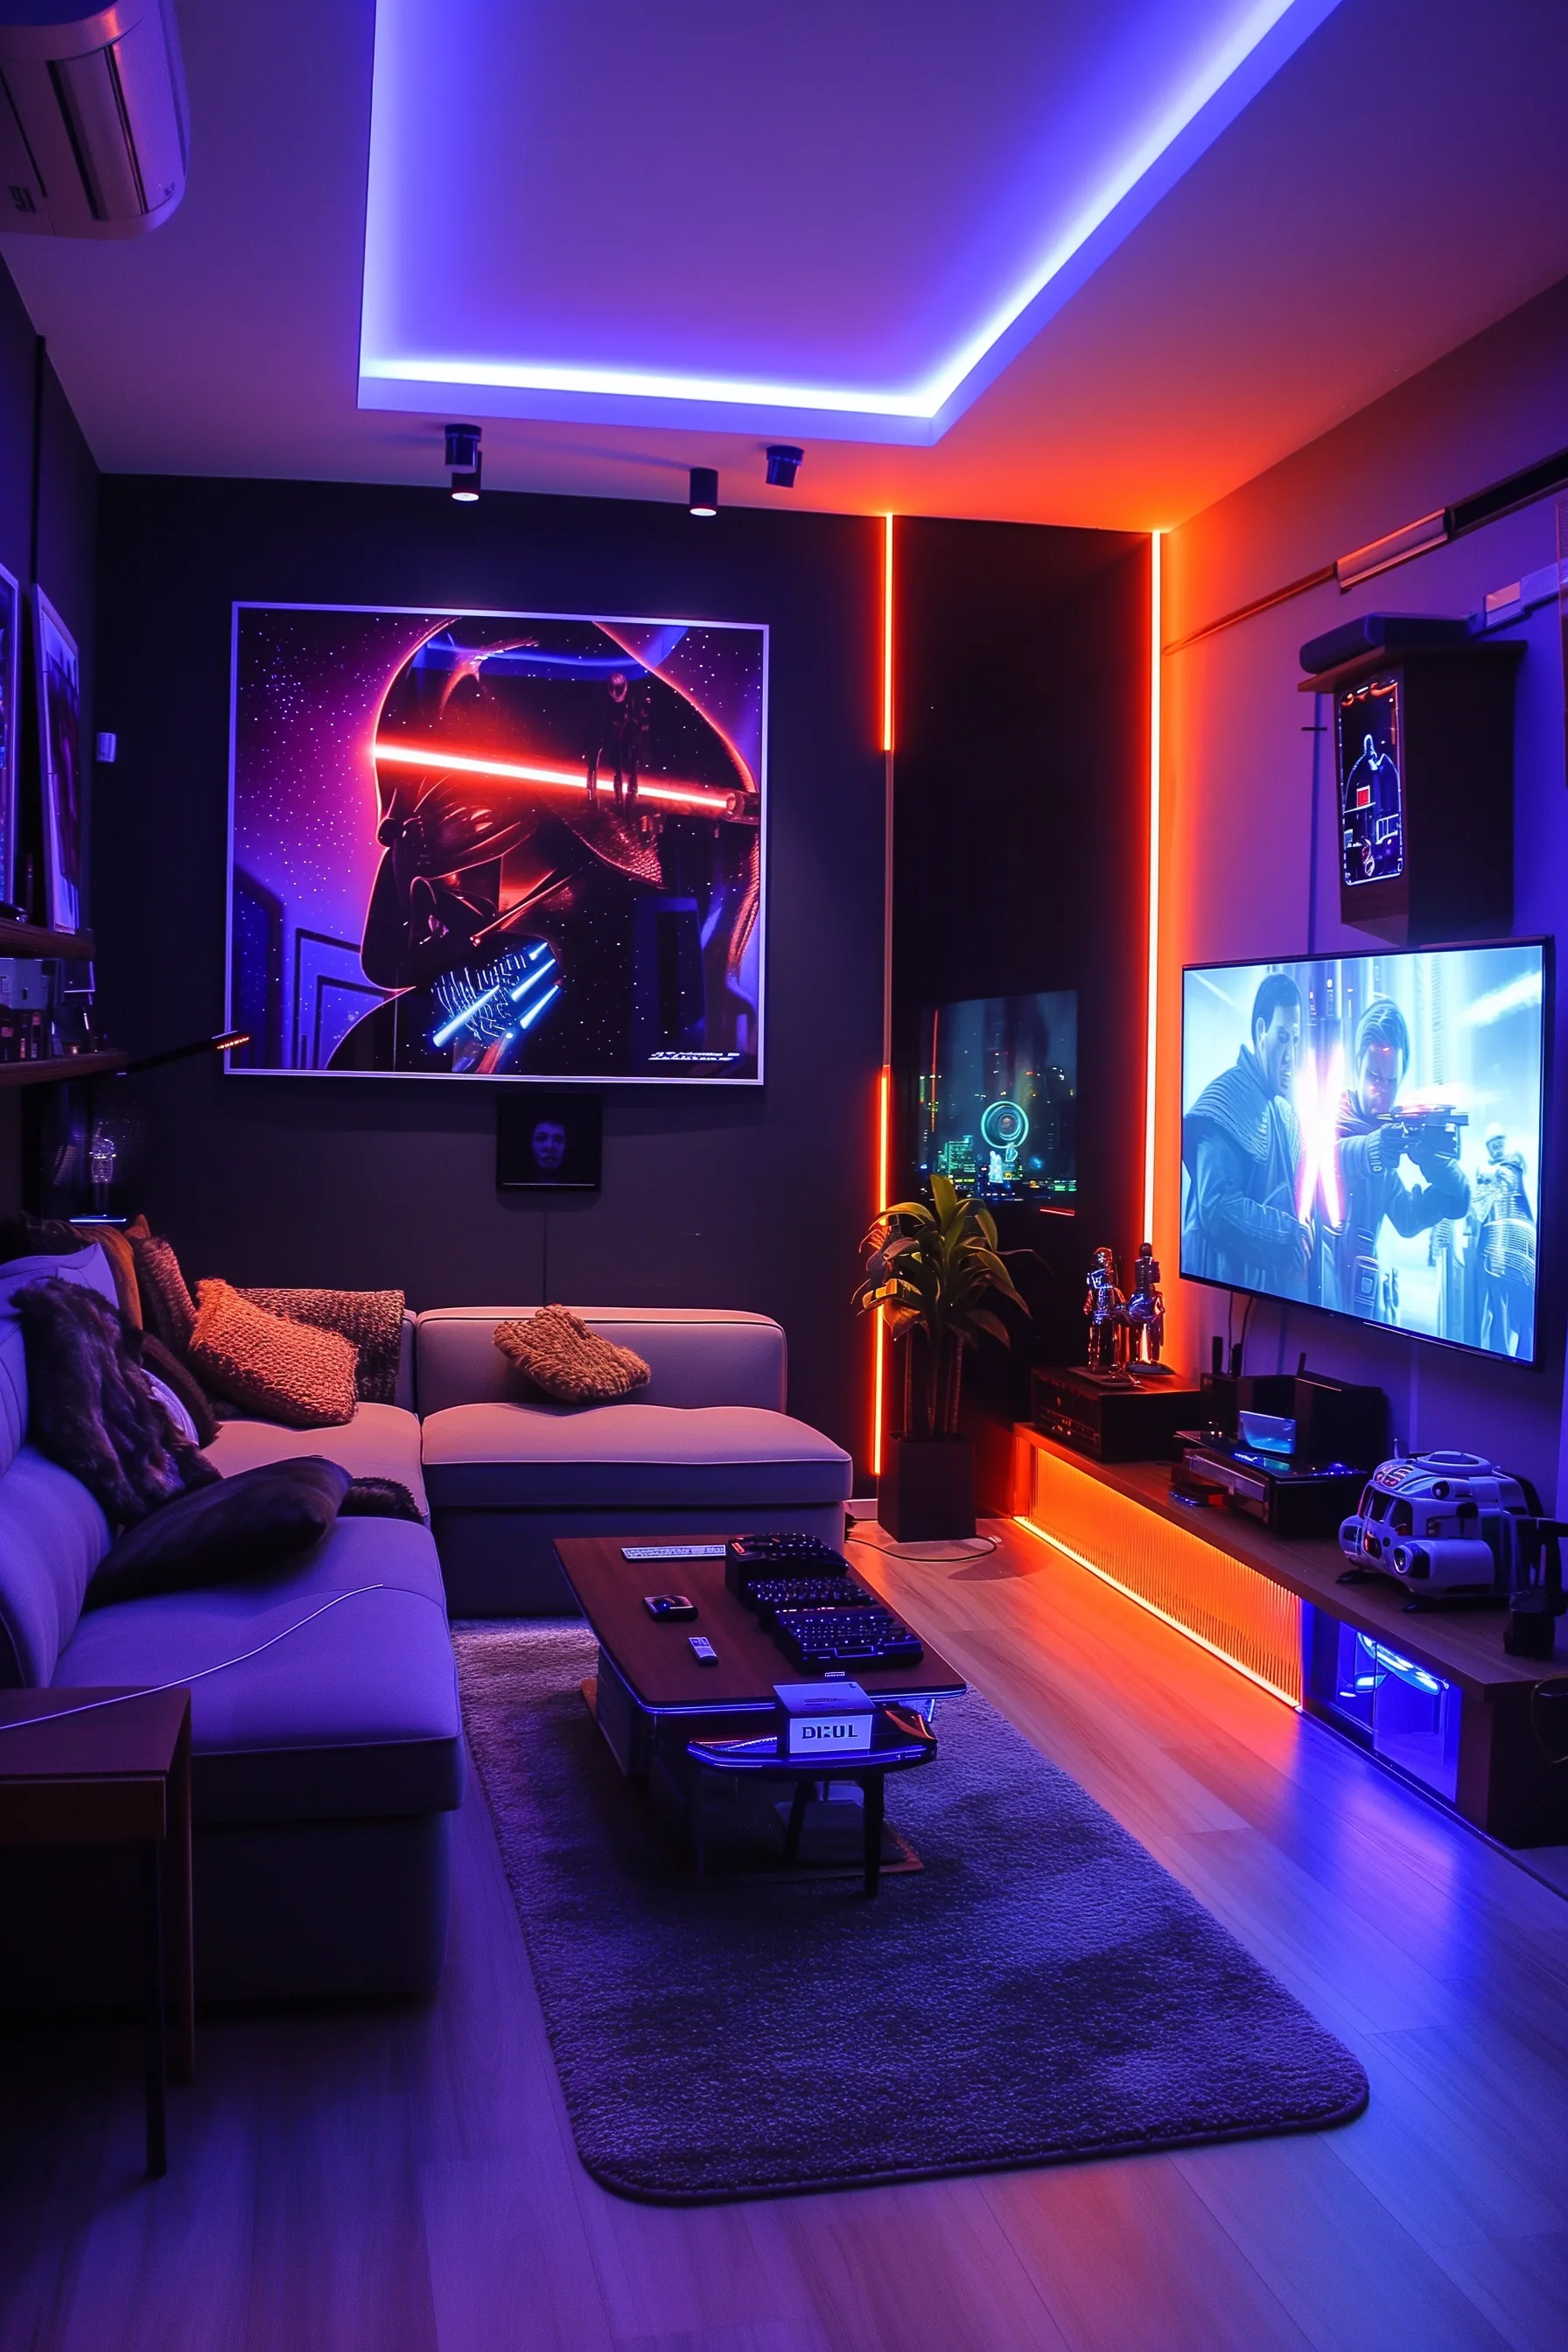 A star wars game room with Darth Vader and light sabers